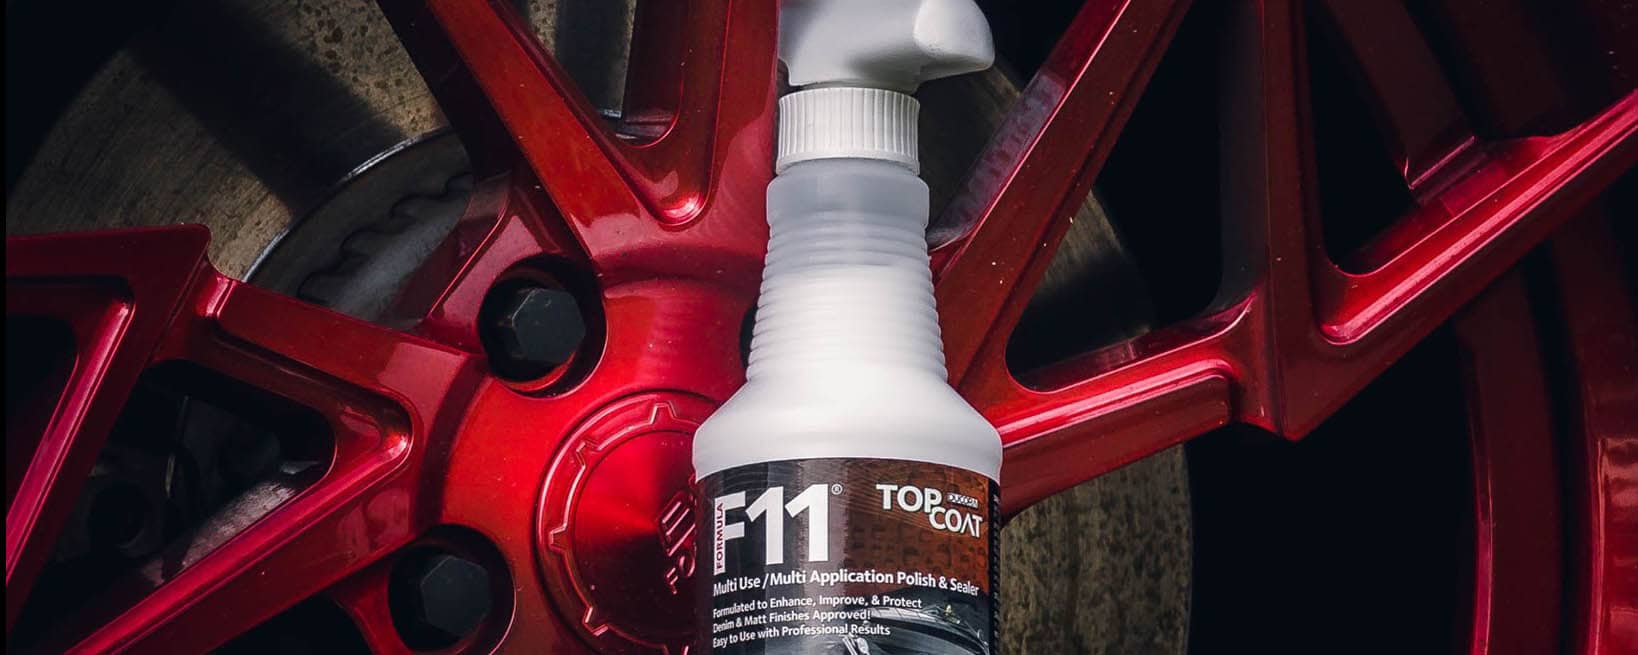 Dirty Wheels, Rims & Tires? No Problem for F11®